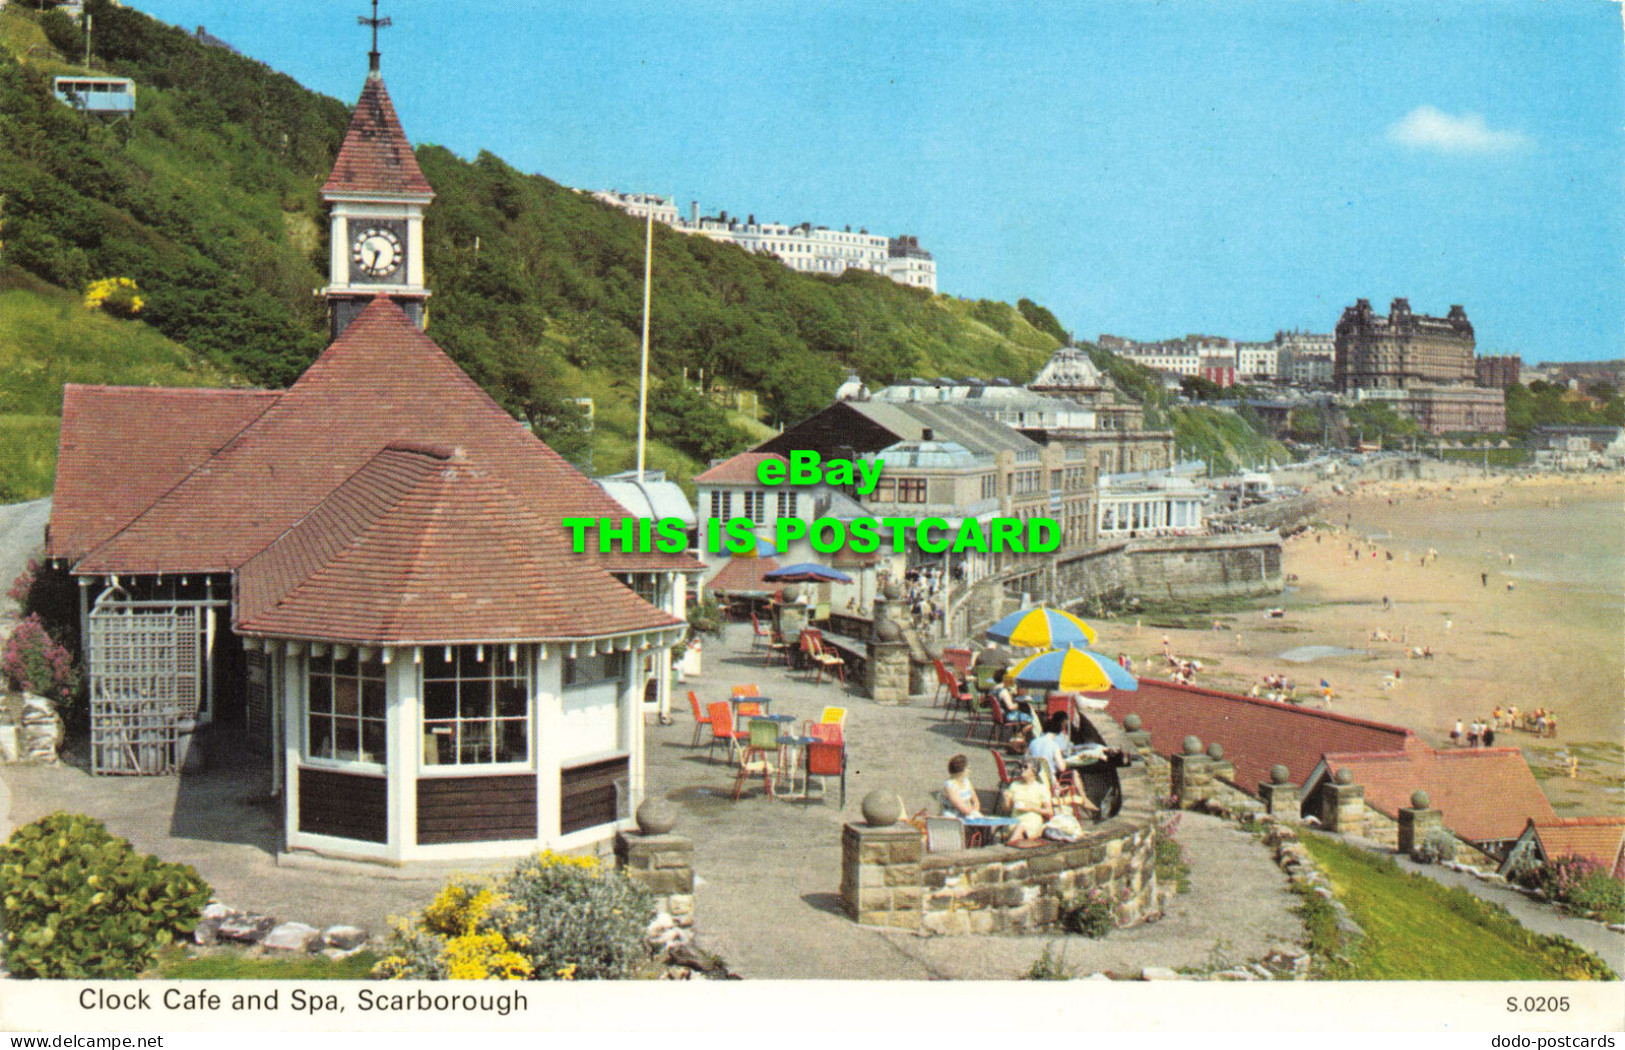 R572426 Clock Cafe And Spa. Scarborough. S.0205. Dennis. 1975 - World